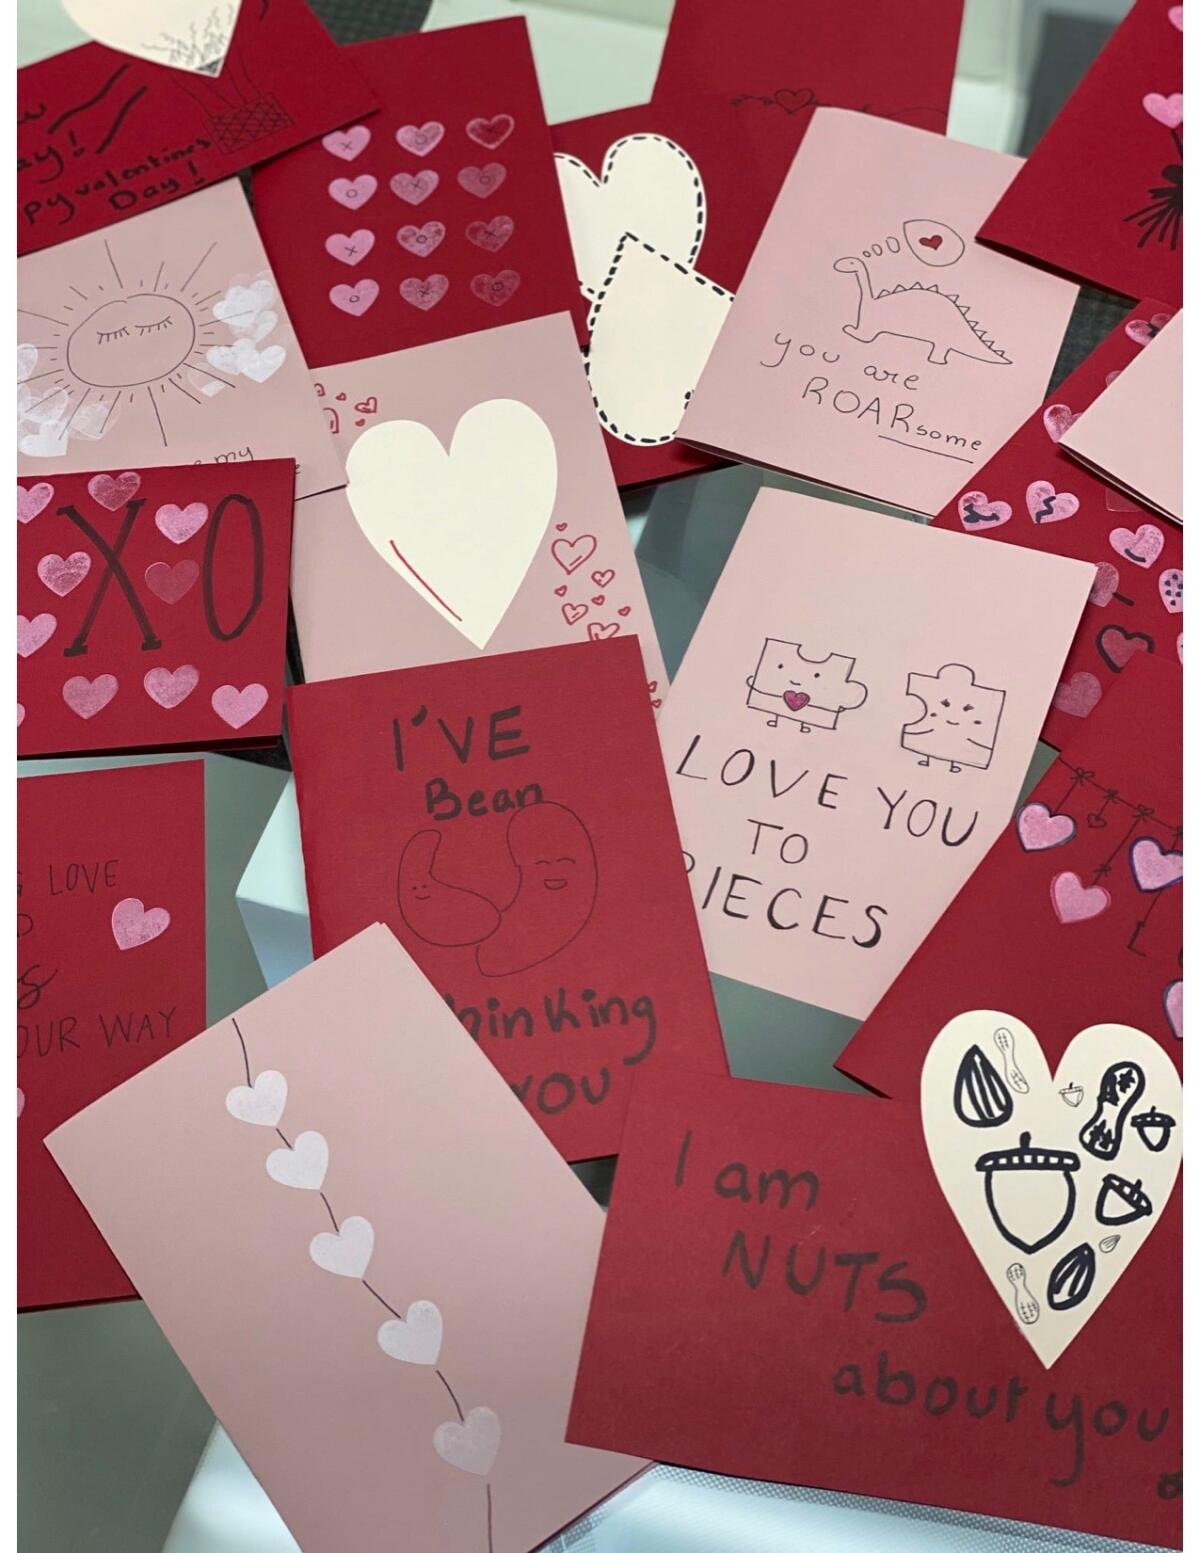 Handmade Valentine's Day cards created and collected to be given to seniors in long-term care through the Council on Aging.